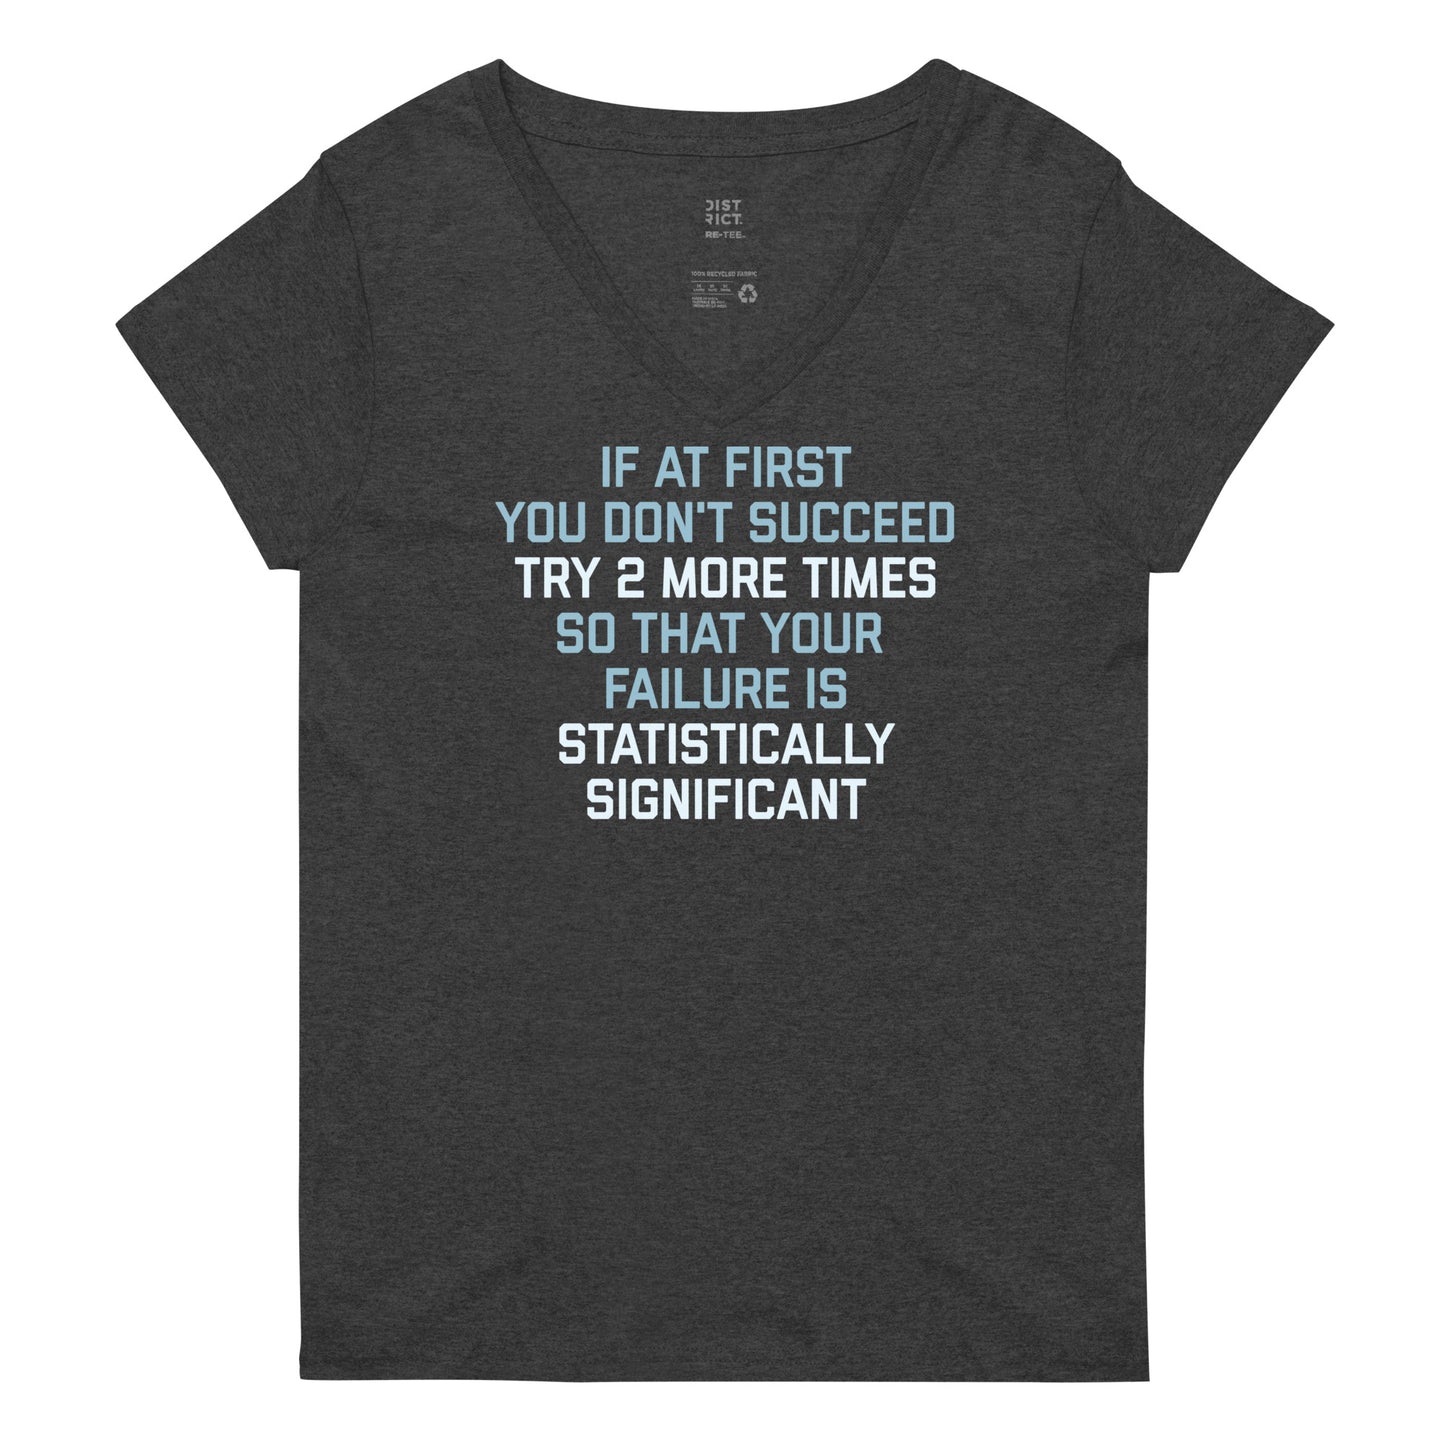 Try 2 More Times So That Your Failure Is Statistically Significant Women's V-Neck Tee